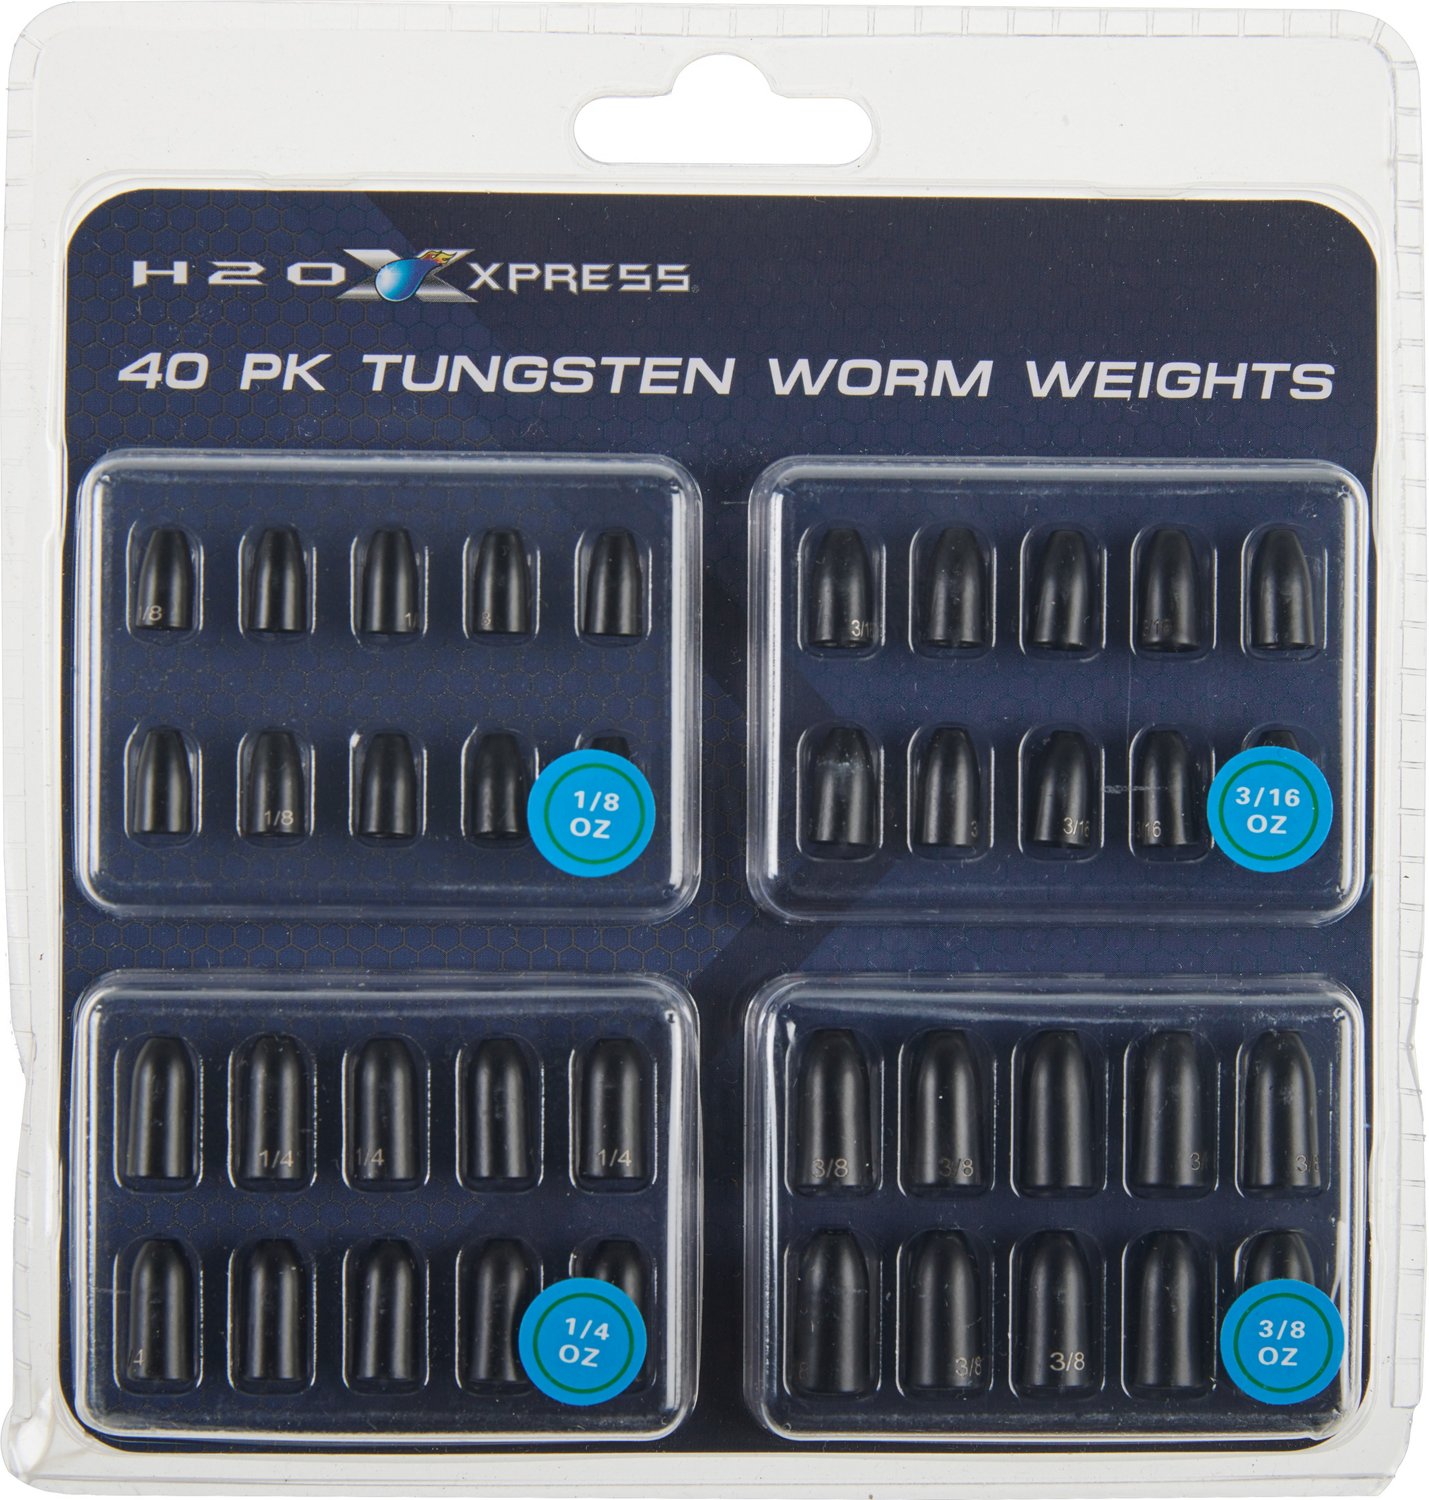 H2O Xpress Tungsten Worm Weights 40-Pack